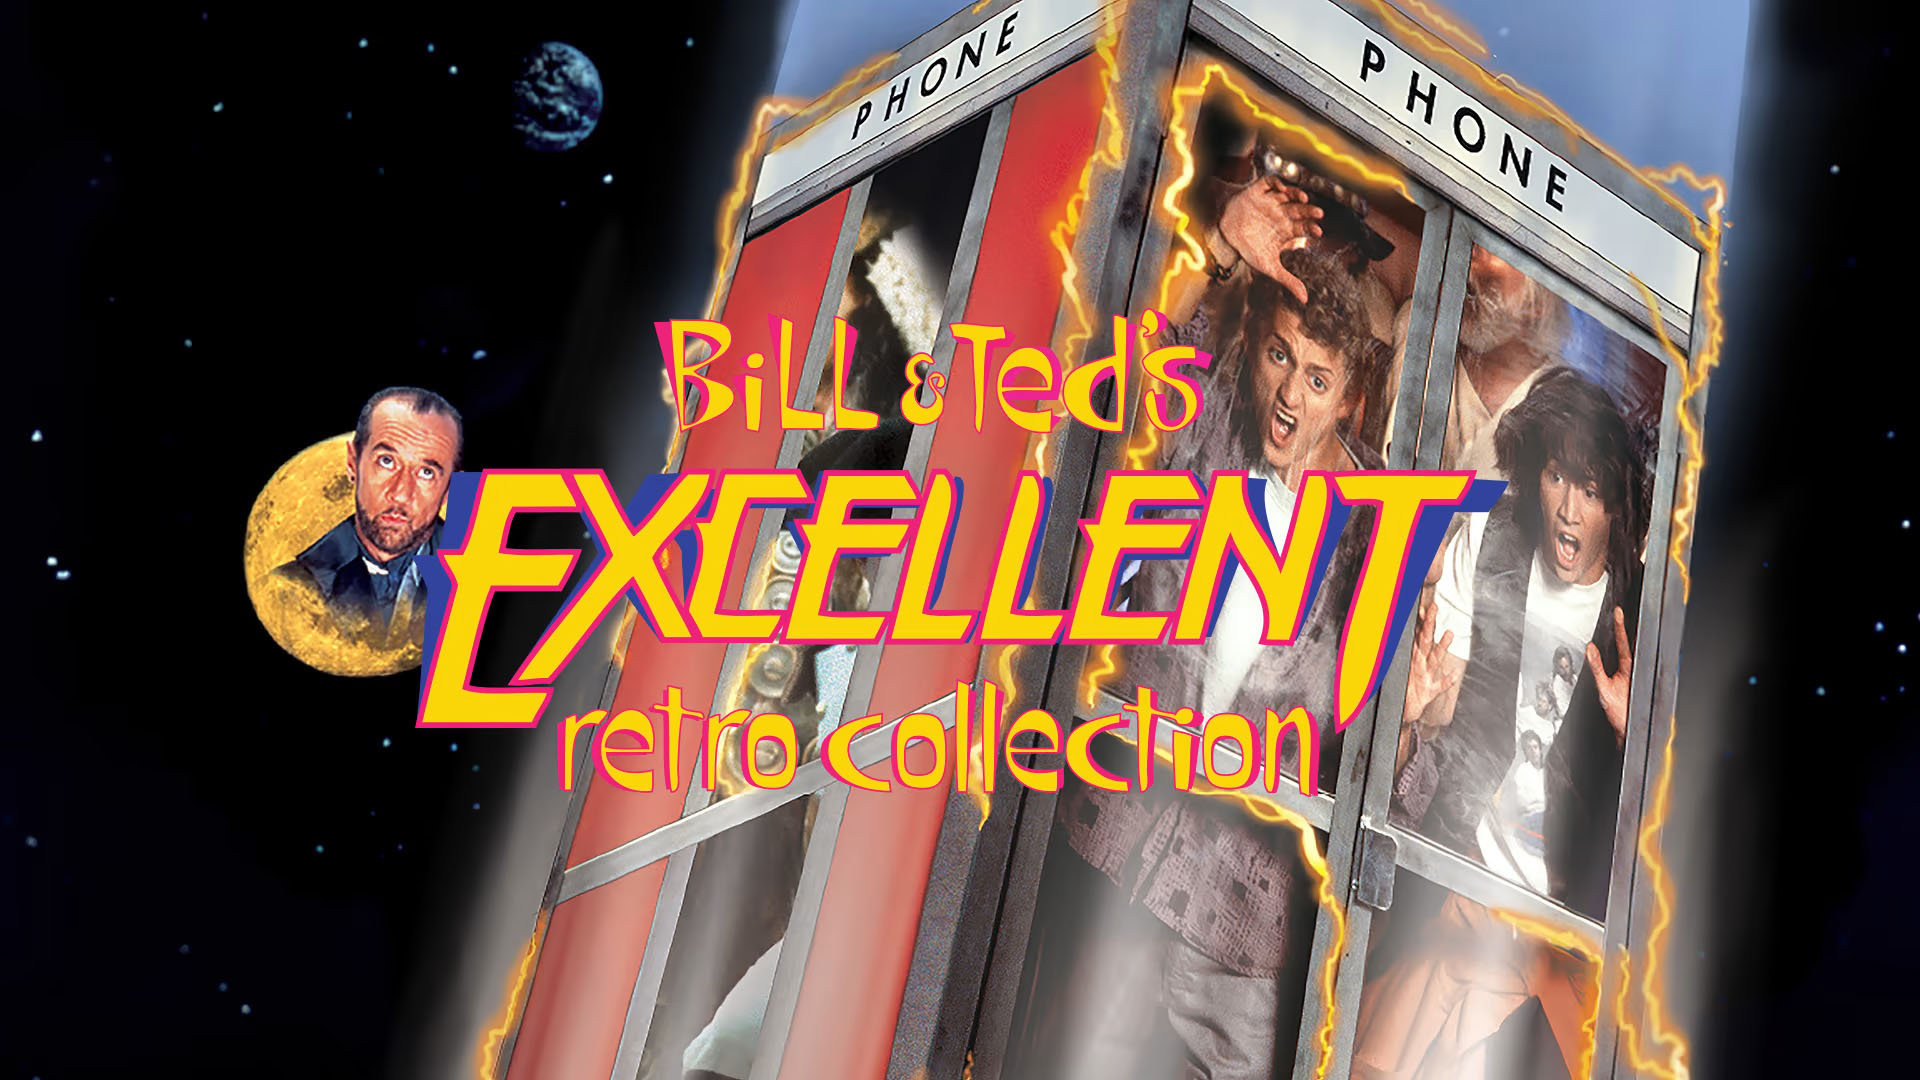 Bill & Ted’s Excellent Retro Collection for PS5, PS4, and Switch now available